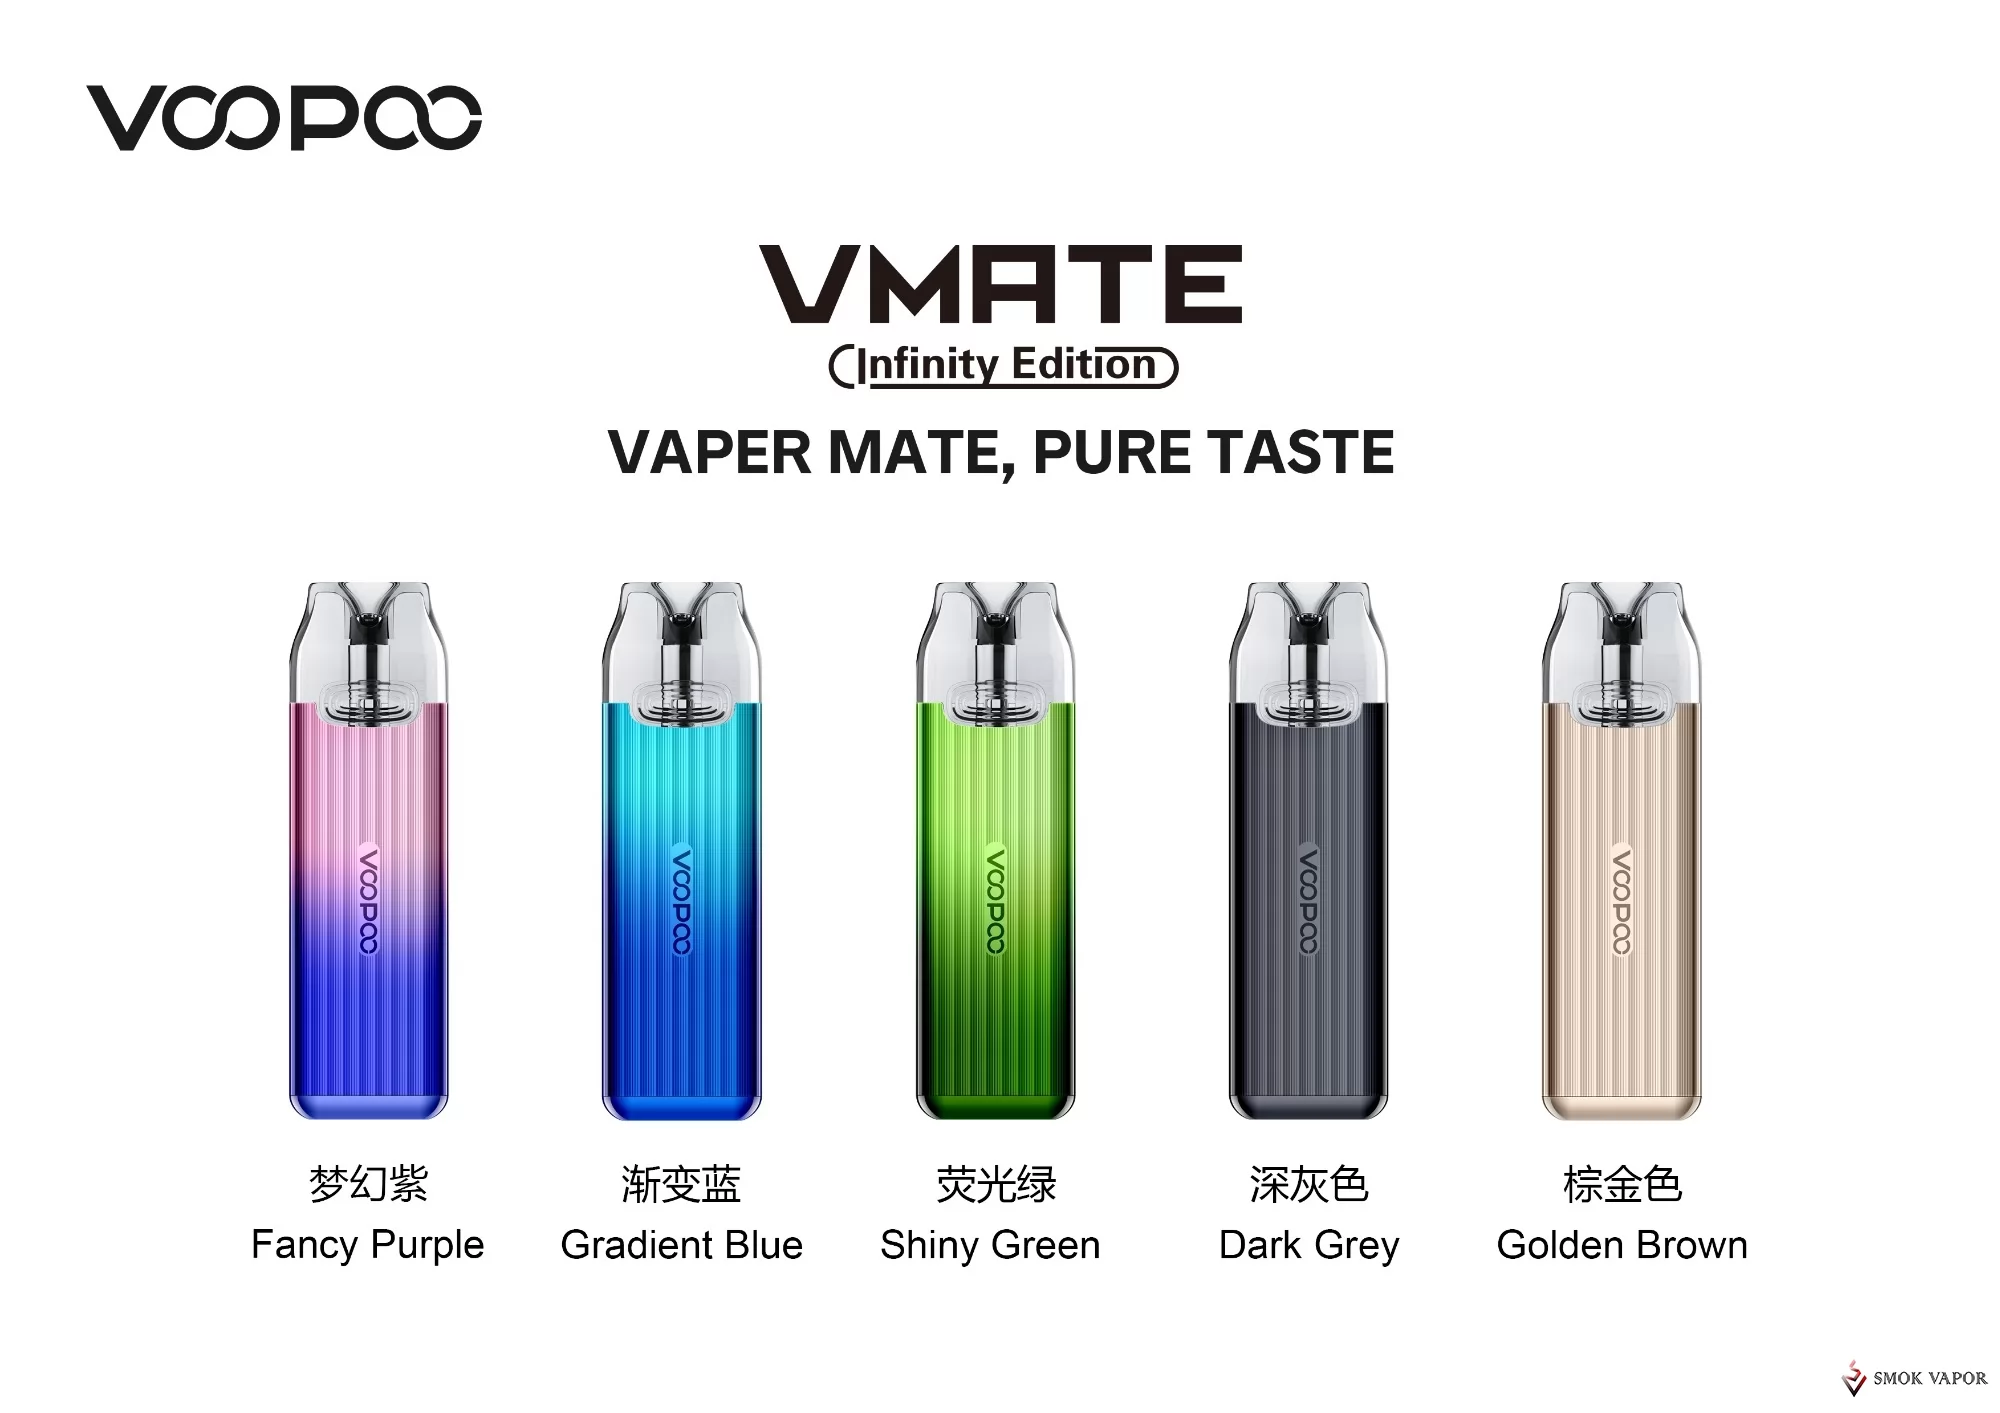 Voopoo Vmate Indinity Edition Kit